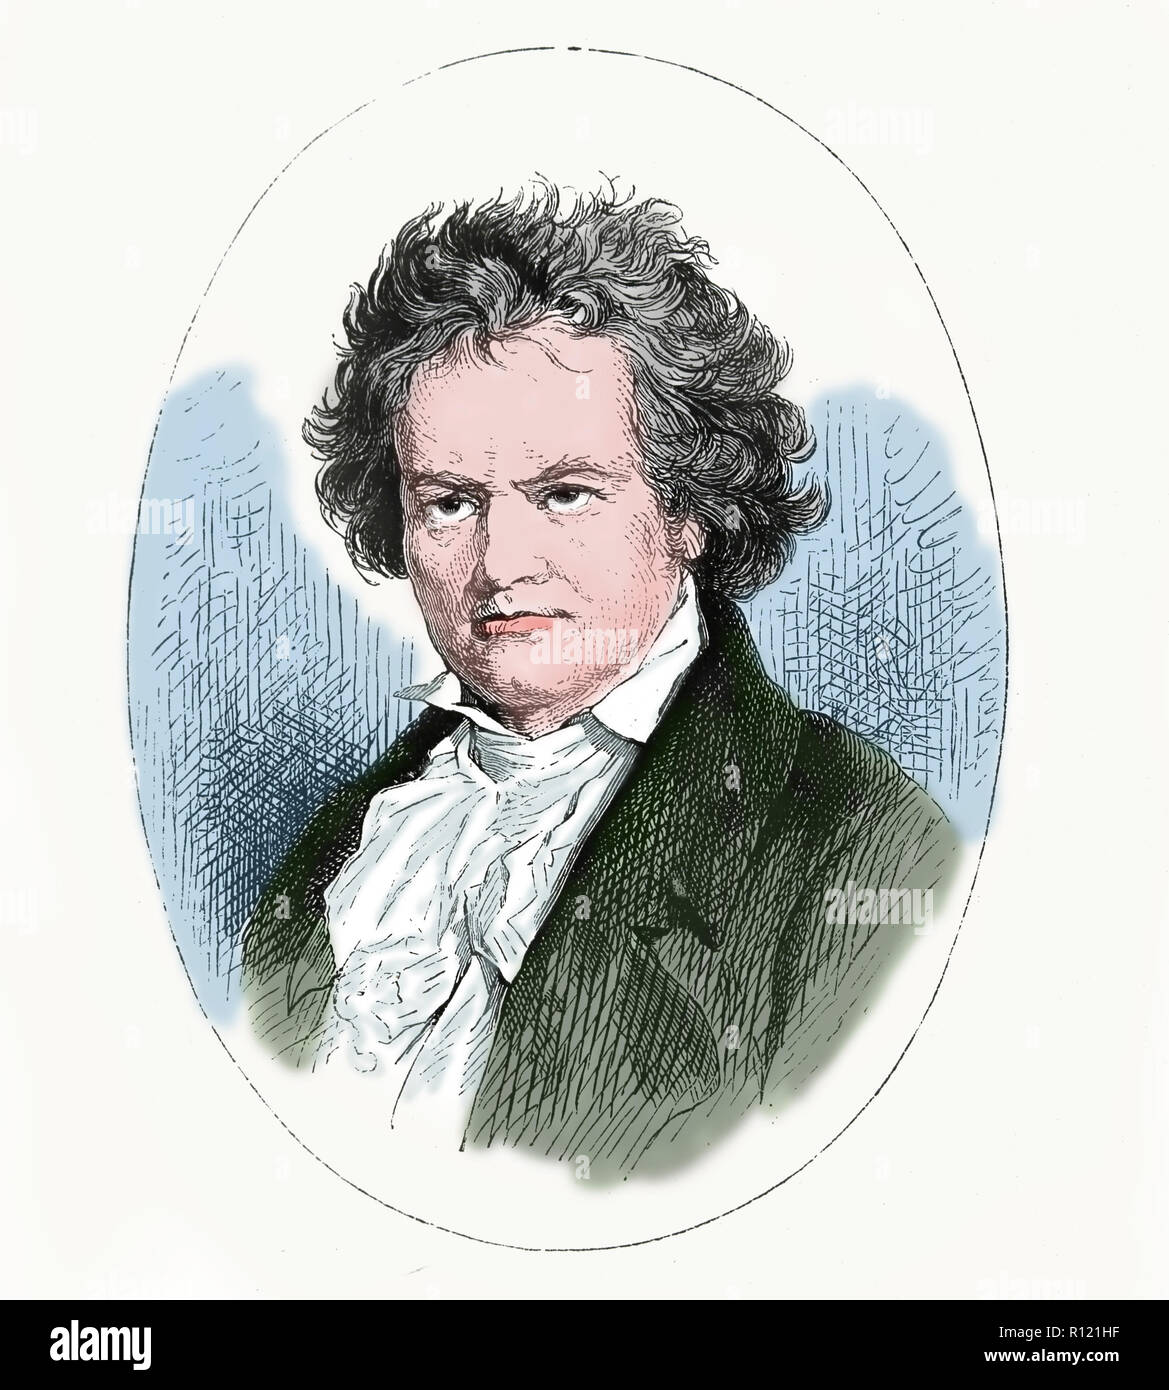 Ludwing van Beethoven (1770-1827). German composer and pianist. Engraving of Germania, 1882. Stock Photo